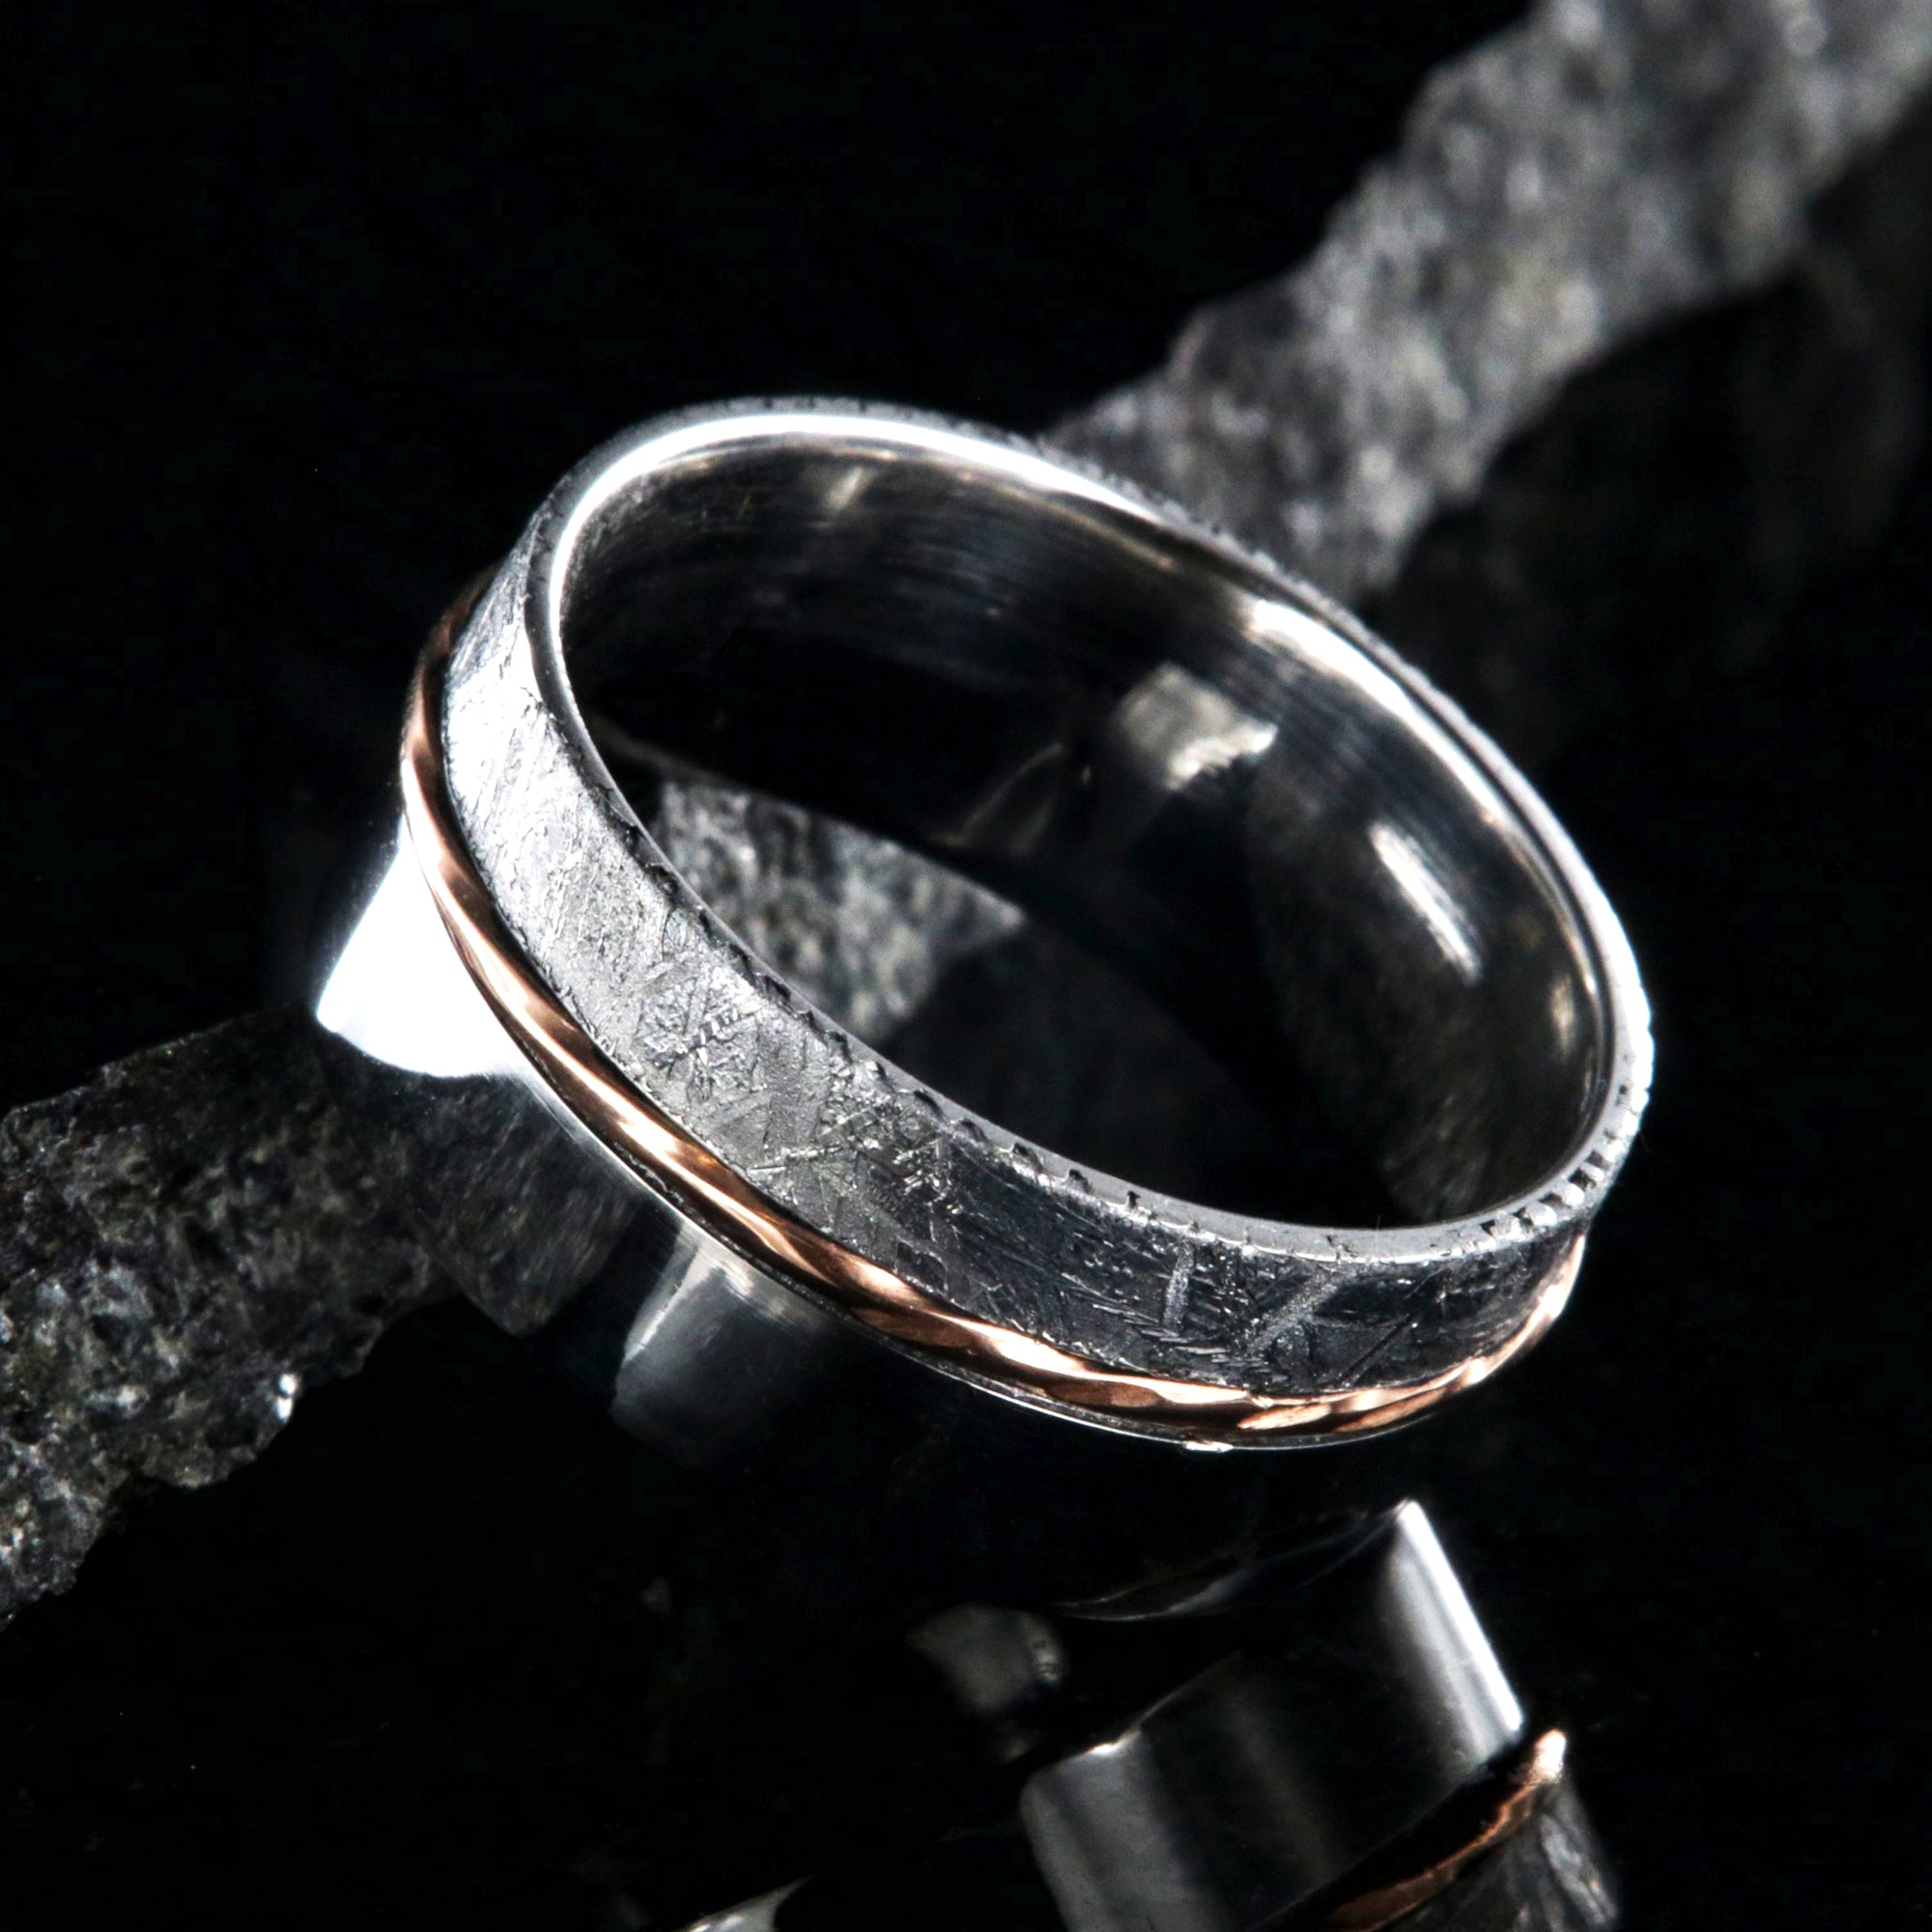 10mm wide wedding band with a wide polished cobalt edge, a centered twisted rose gold inlay, and narrow Gibeon meteorite edge